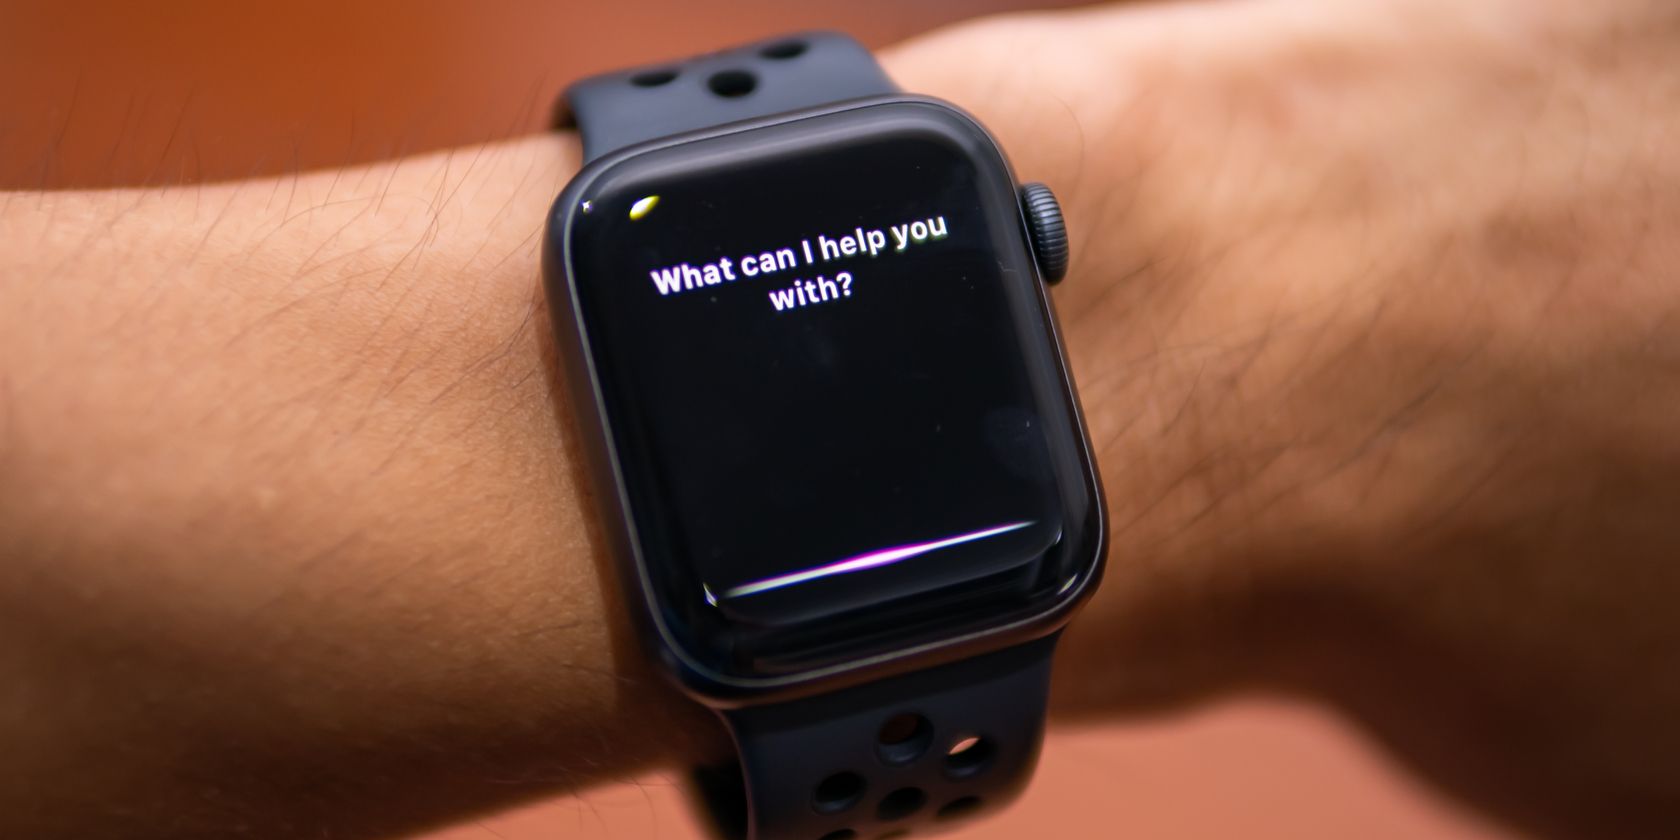 Siri on Apple Watch waiting for user's command